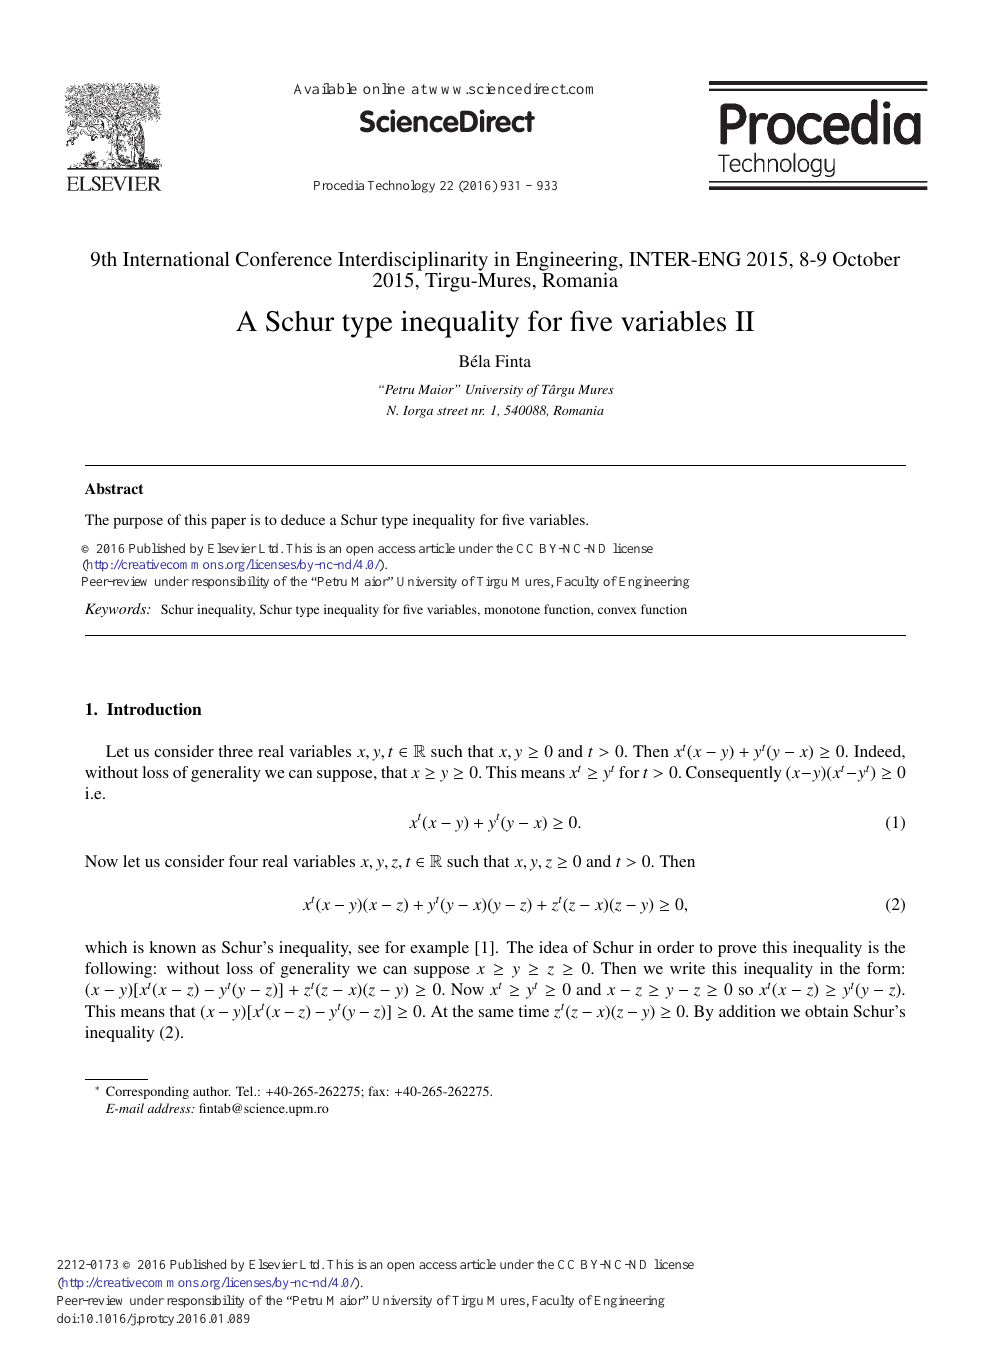 A Schur Type Inequality For Five Variables Ii Topic Of Research Paper In Economics And Business Download Scholarly Article Pdf And Read For Free On Cyberleninka Open Science Hub